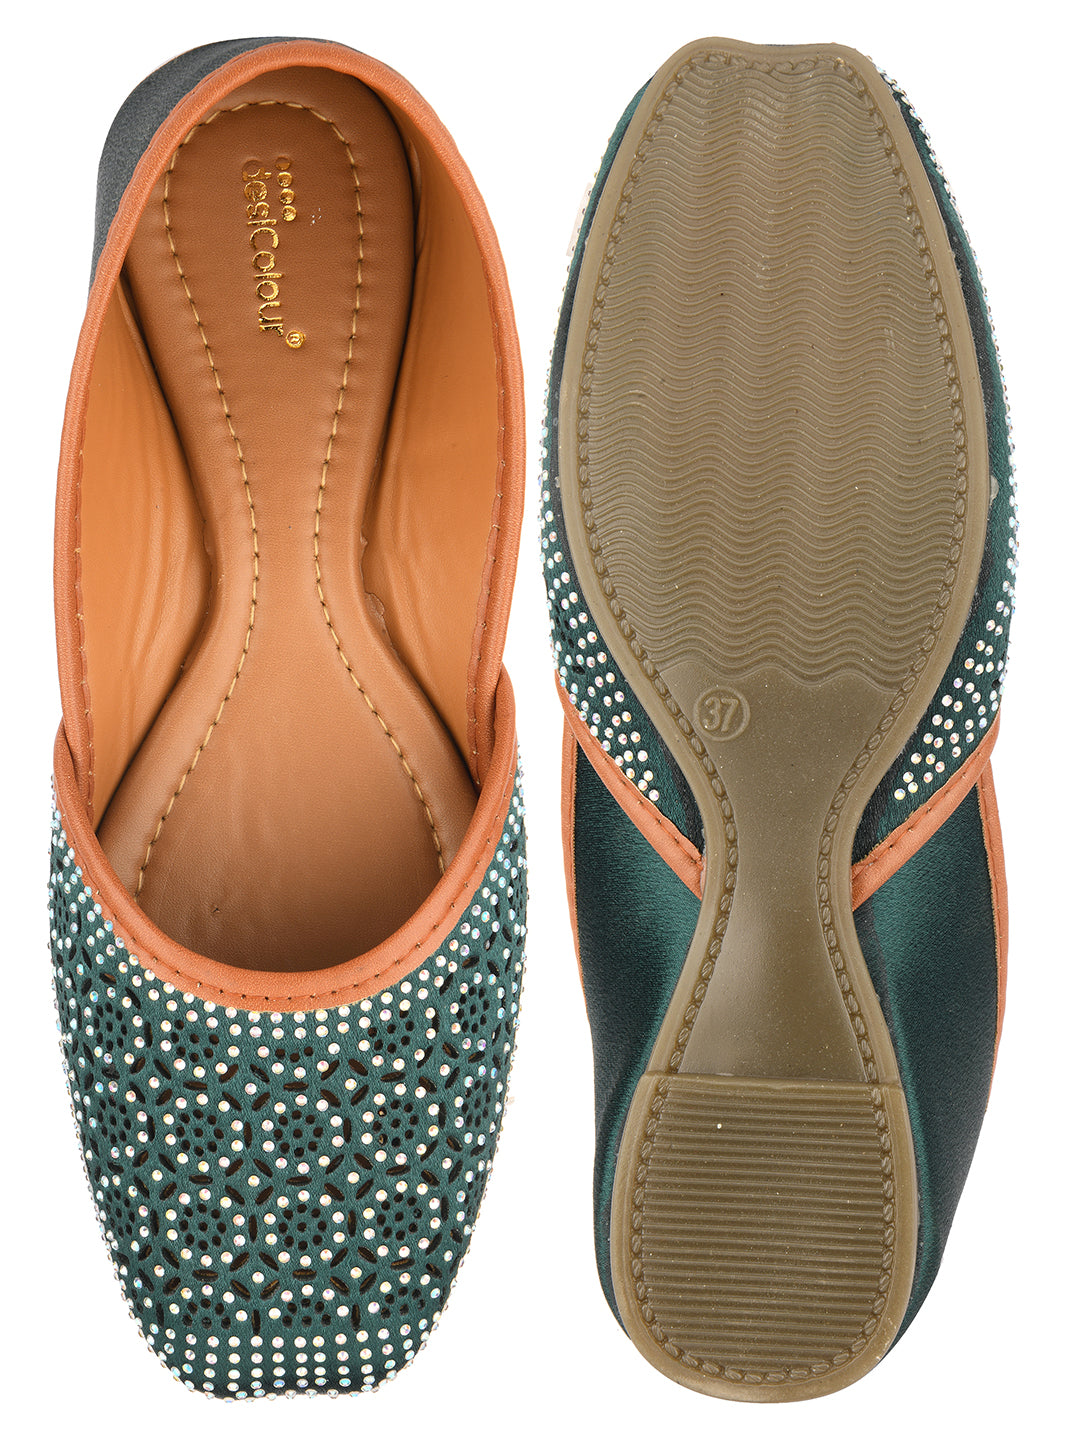 Women's Teal Handcrafted Stone Work  Indian Ethnic Comfort Footwear - Desi Colour